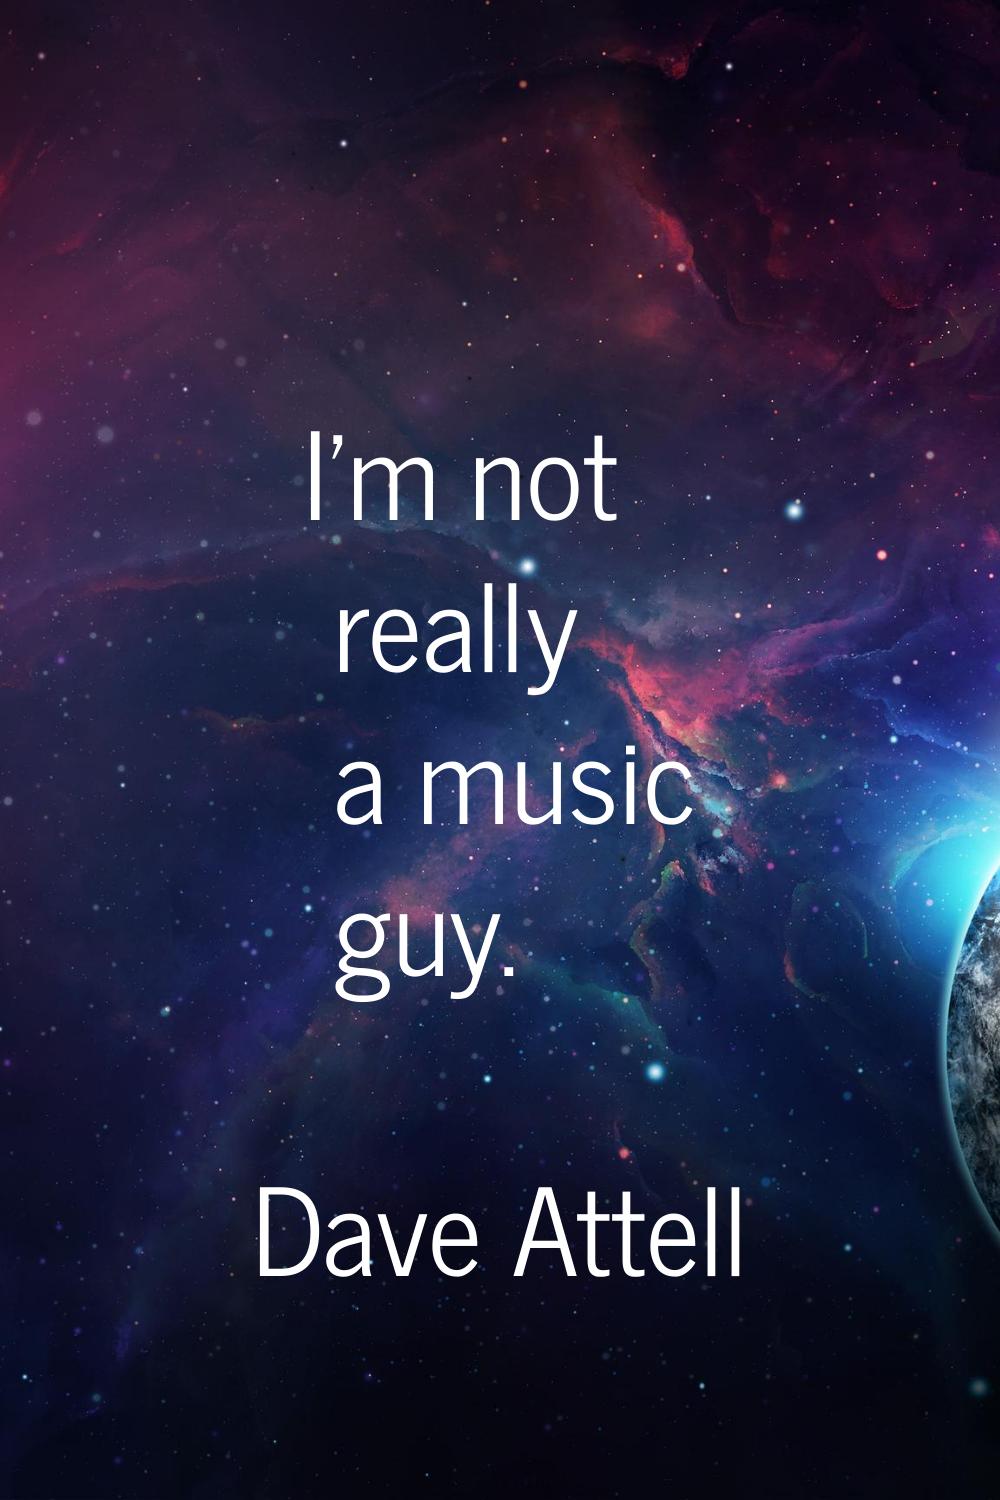 I'm not really a music guy.